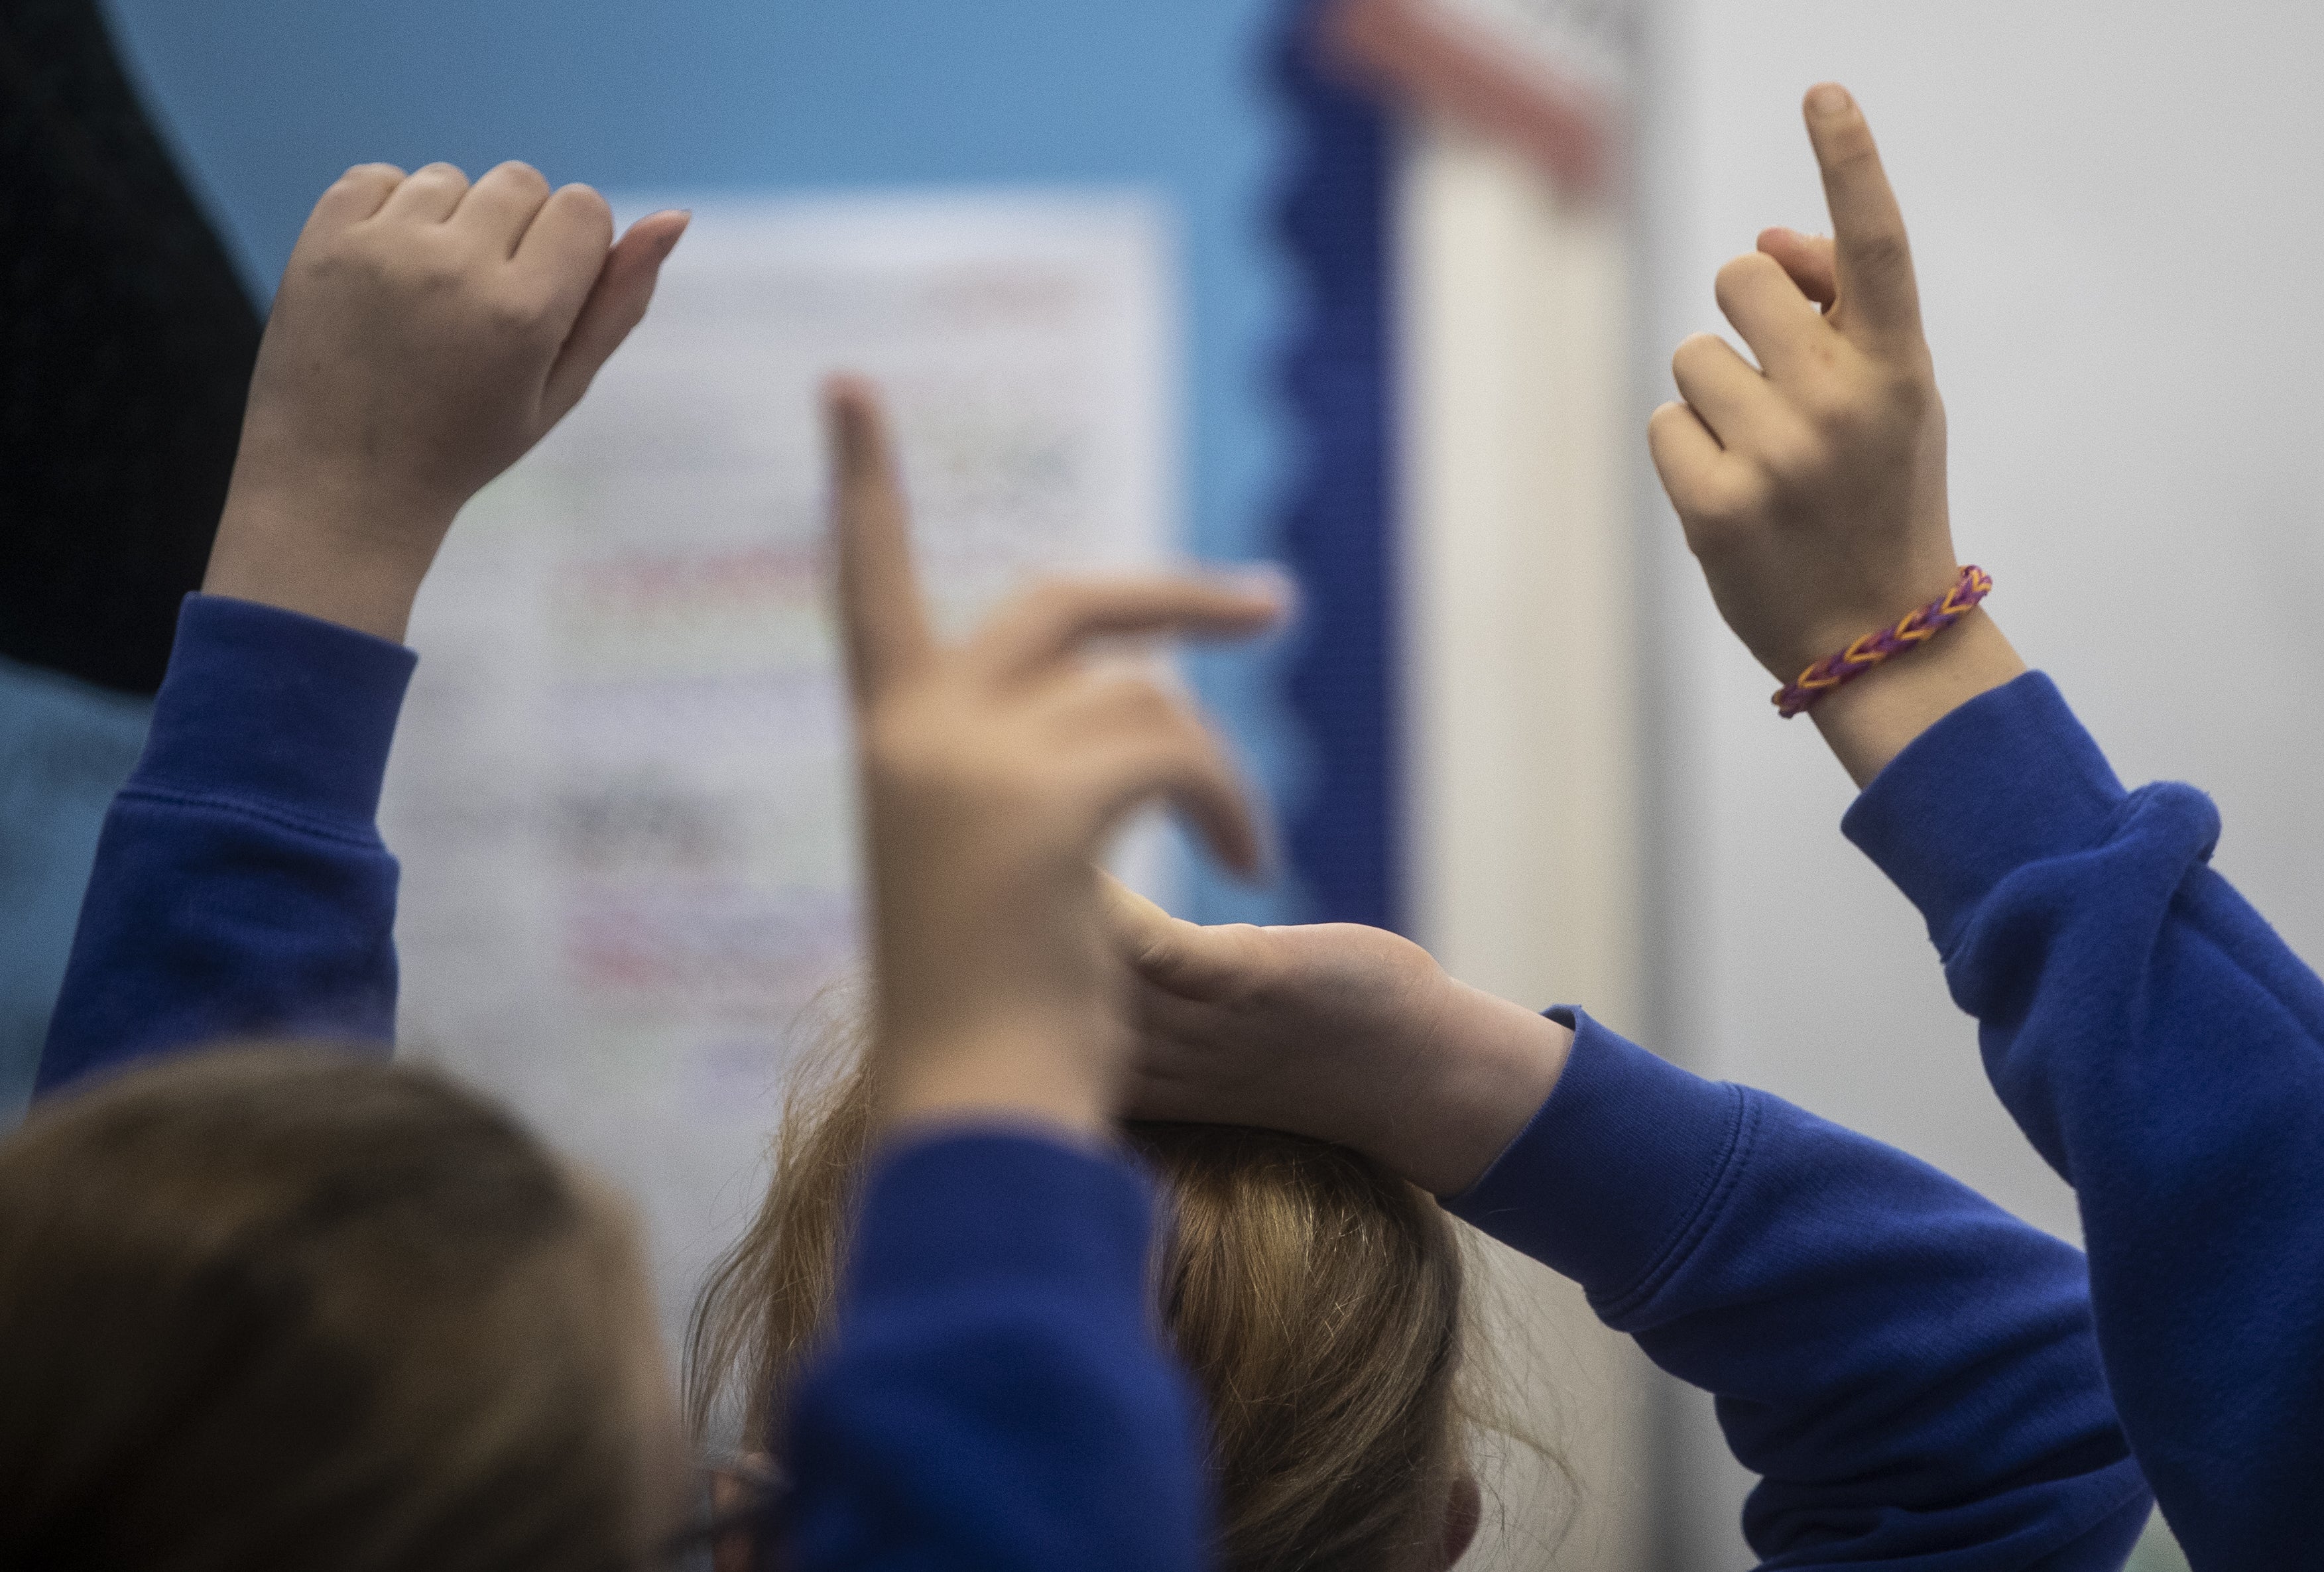 Figures released earlier this year showed that around 125,000 pupils last year were severely absent from school